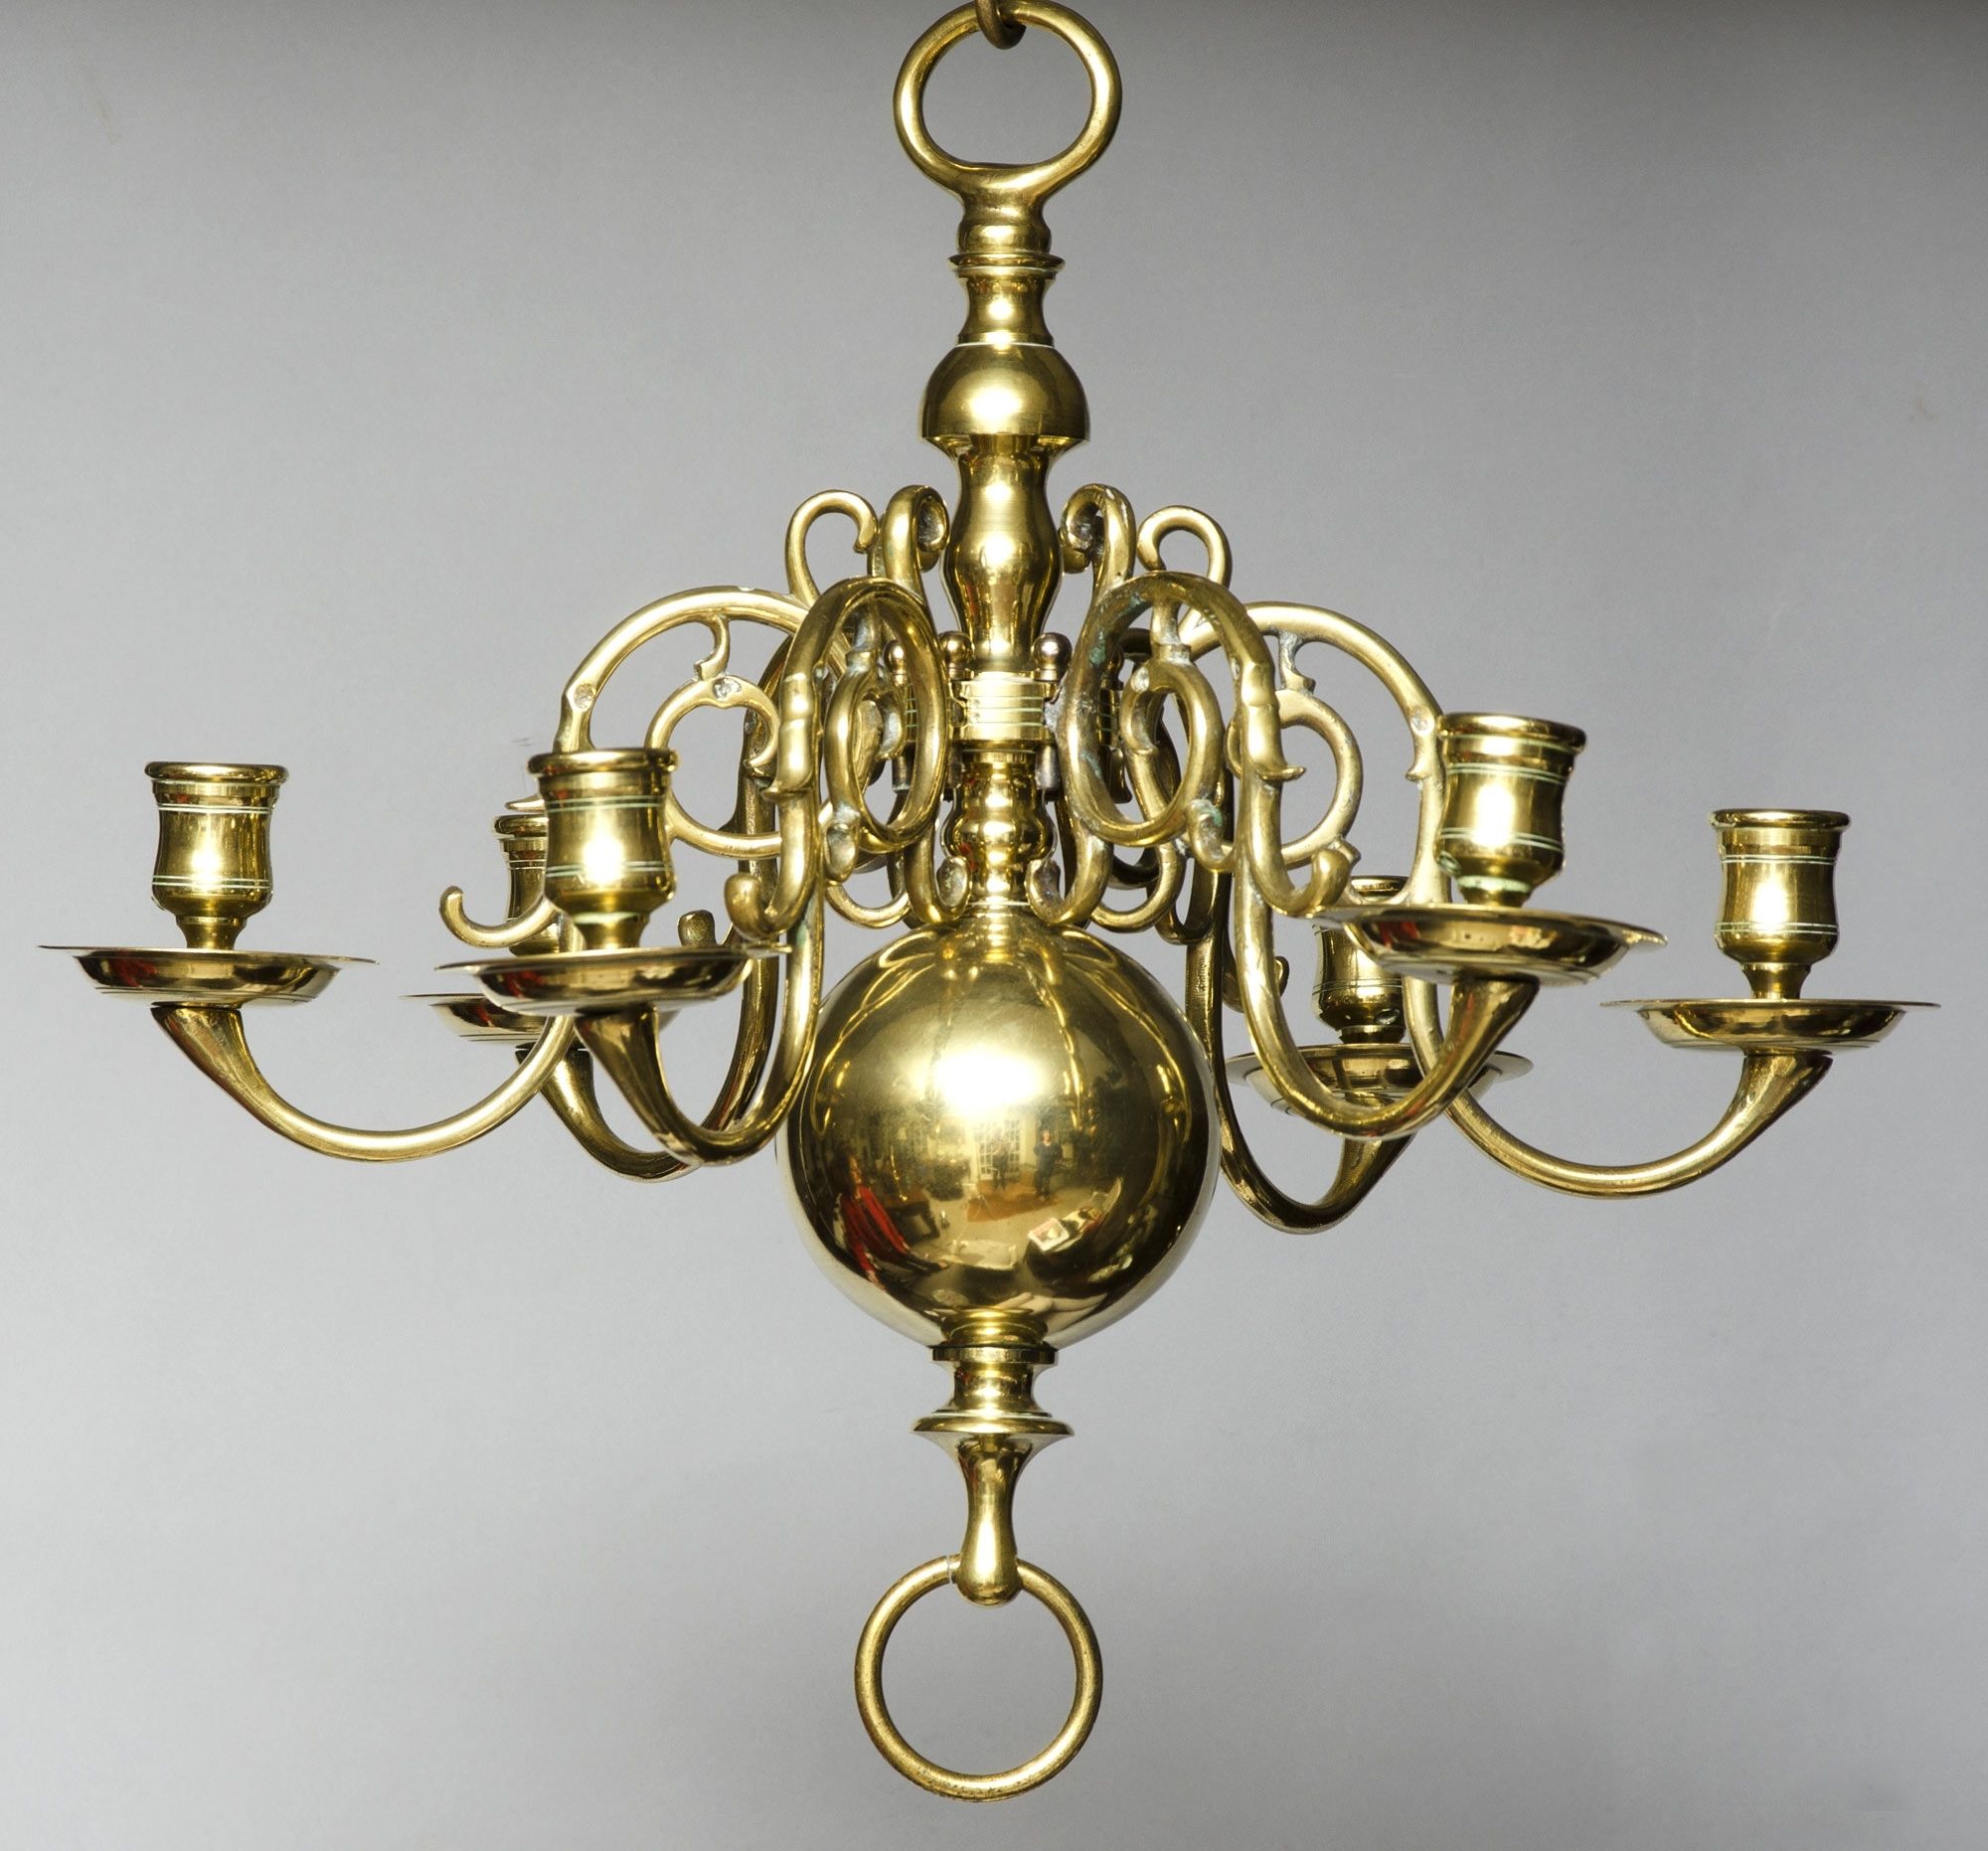 Best And Newest Traditional Brass Chandeliers Within Traditional Antique Brass Chandeliers – Chandelier Designs (View 4 of 20)